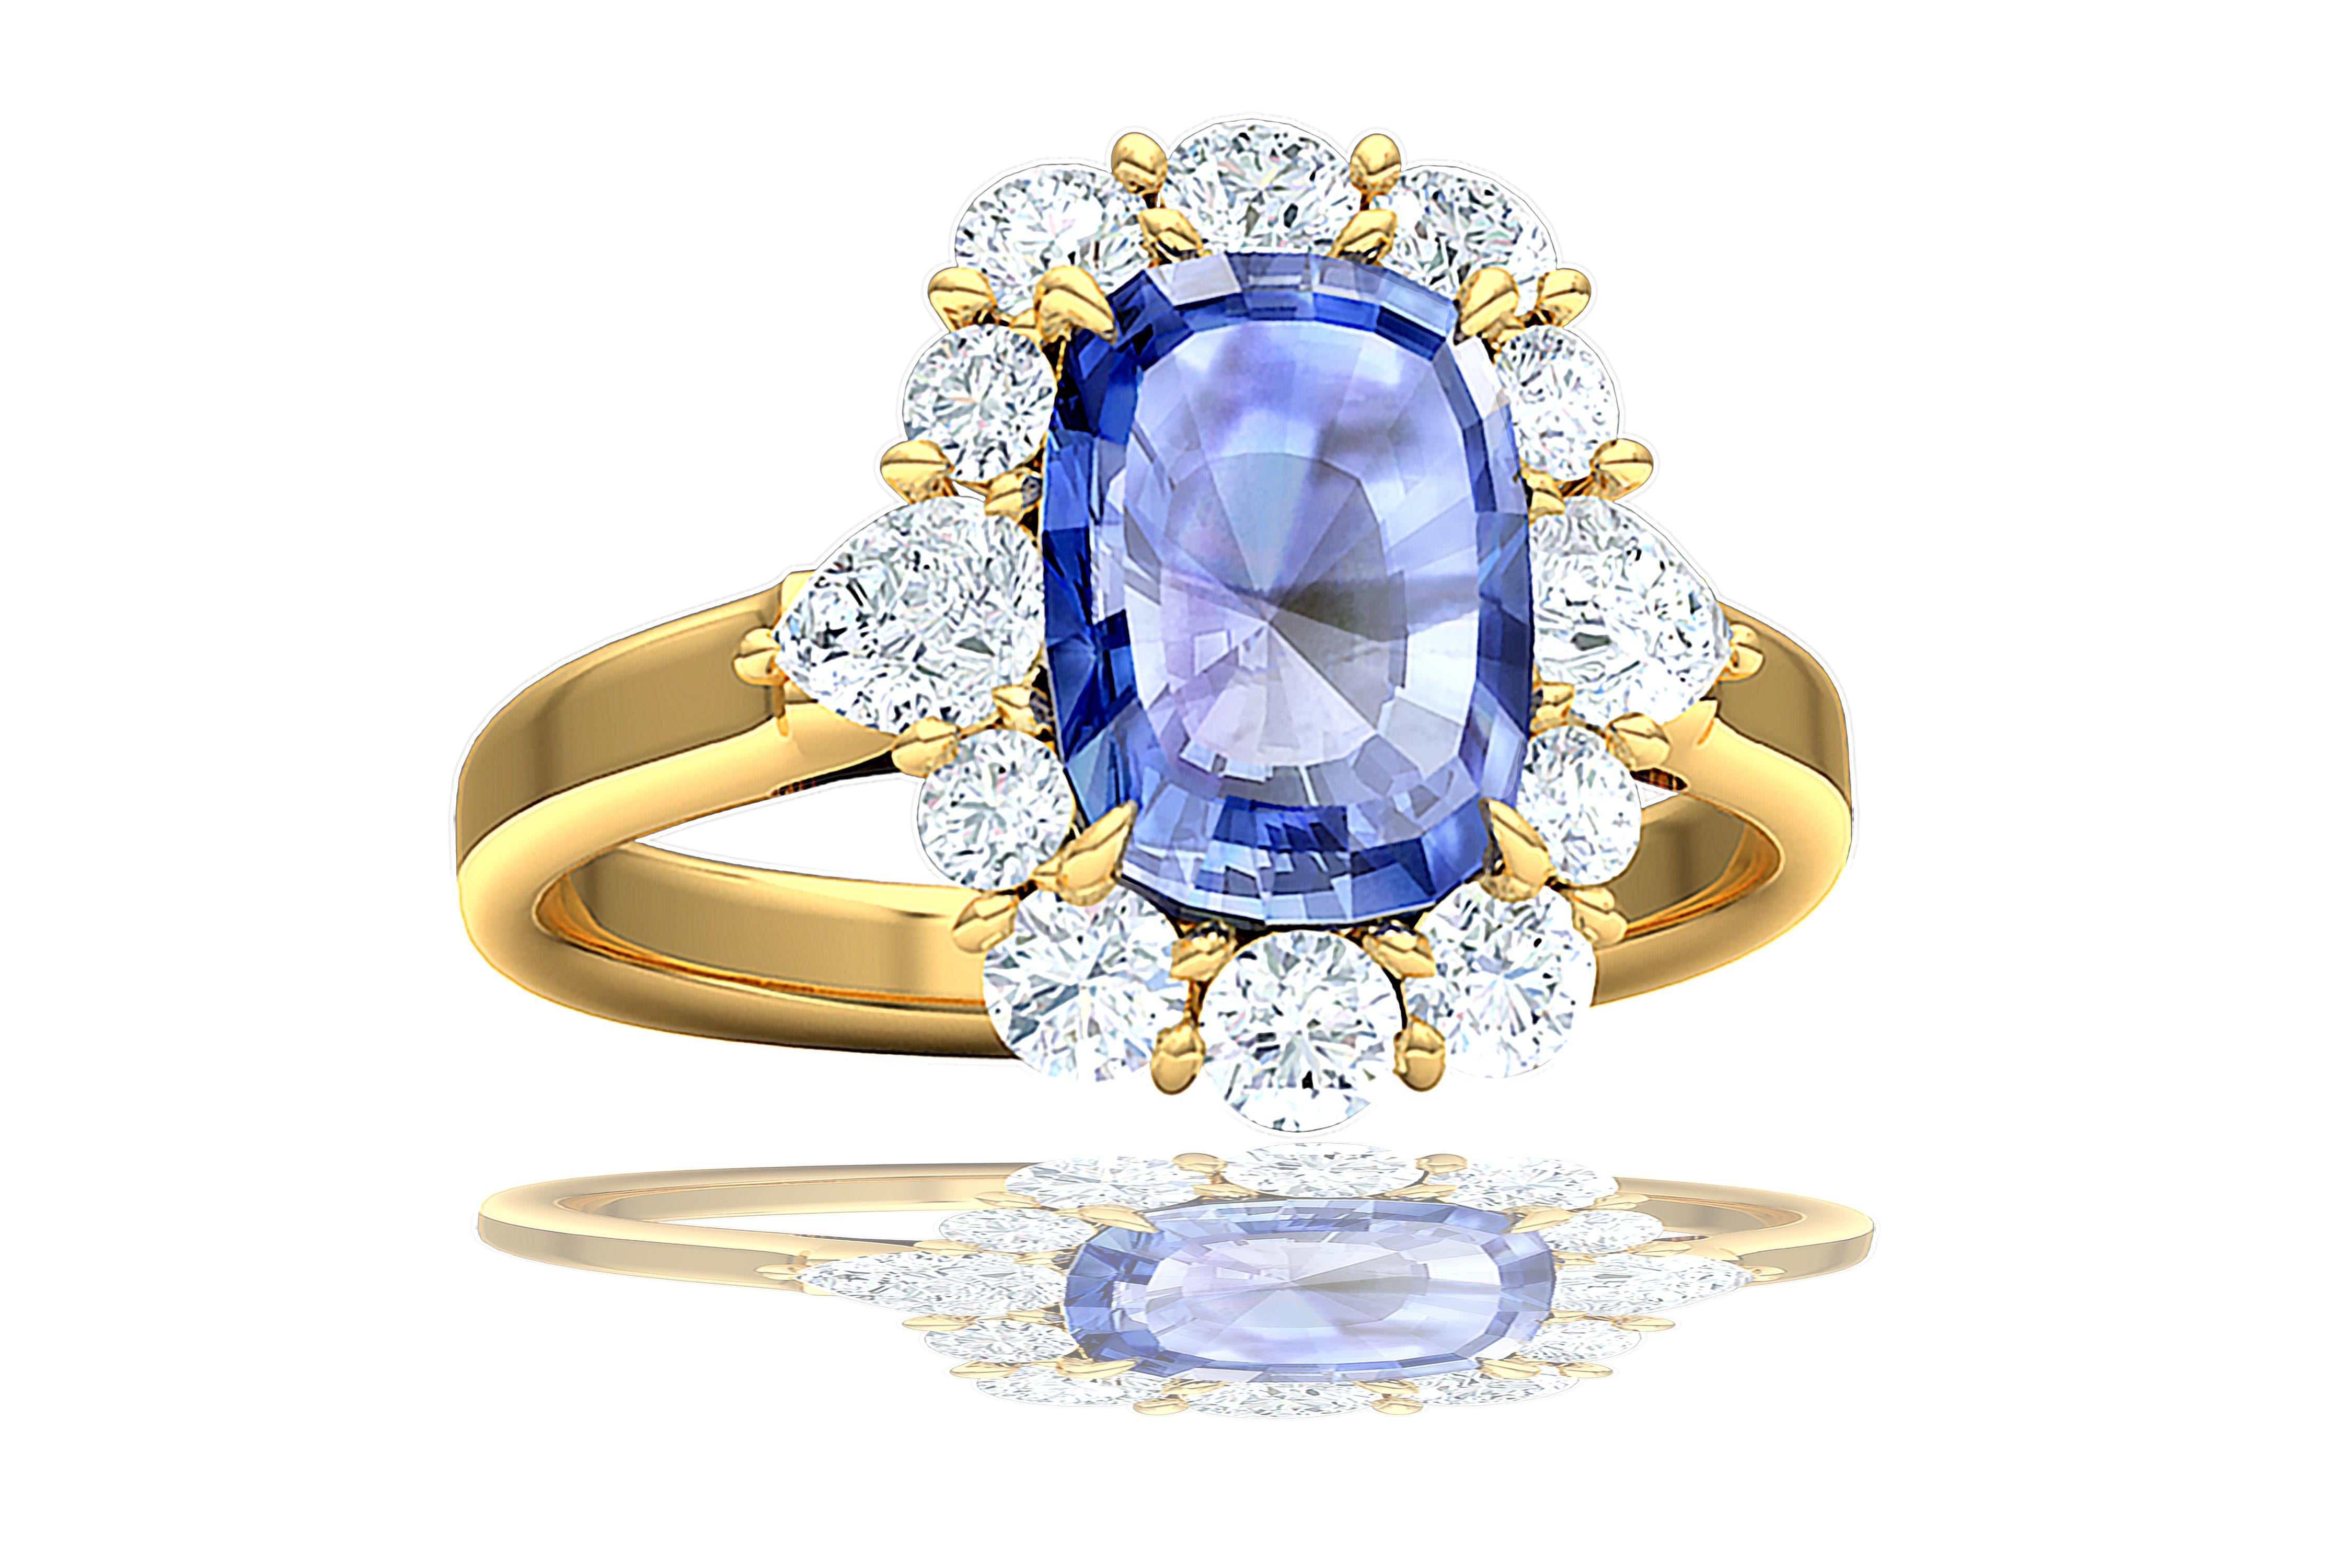 A beautiful elongated cornflower Ceylon Sapphire is complimented by over one carat of round brilliant and pear shape diamonds.  The diamonds have a color and clarity of G-H VS-SI.  The diamonds are set in a shared prong style and set in 18k yellow